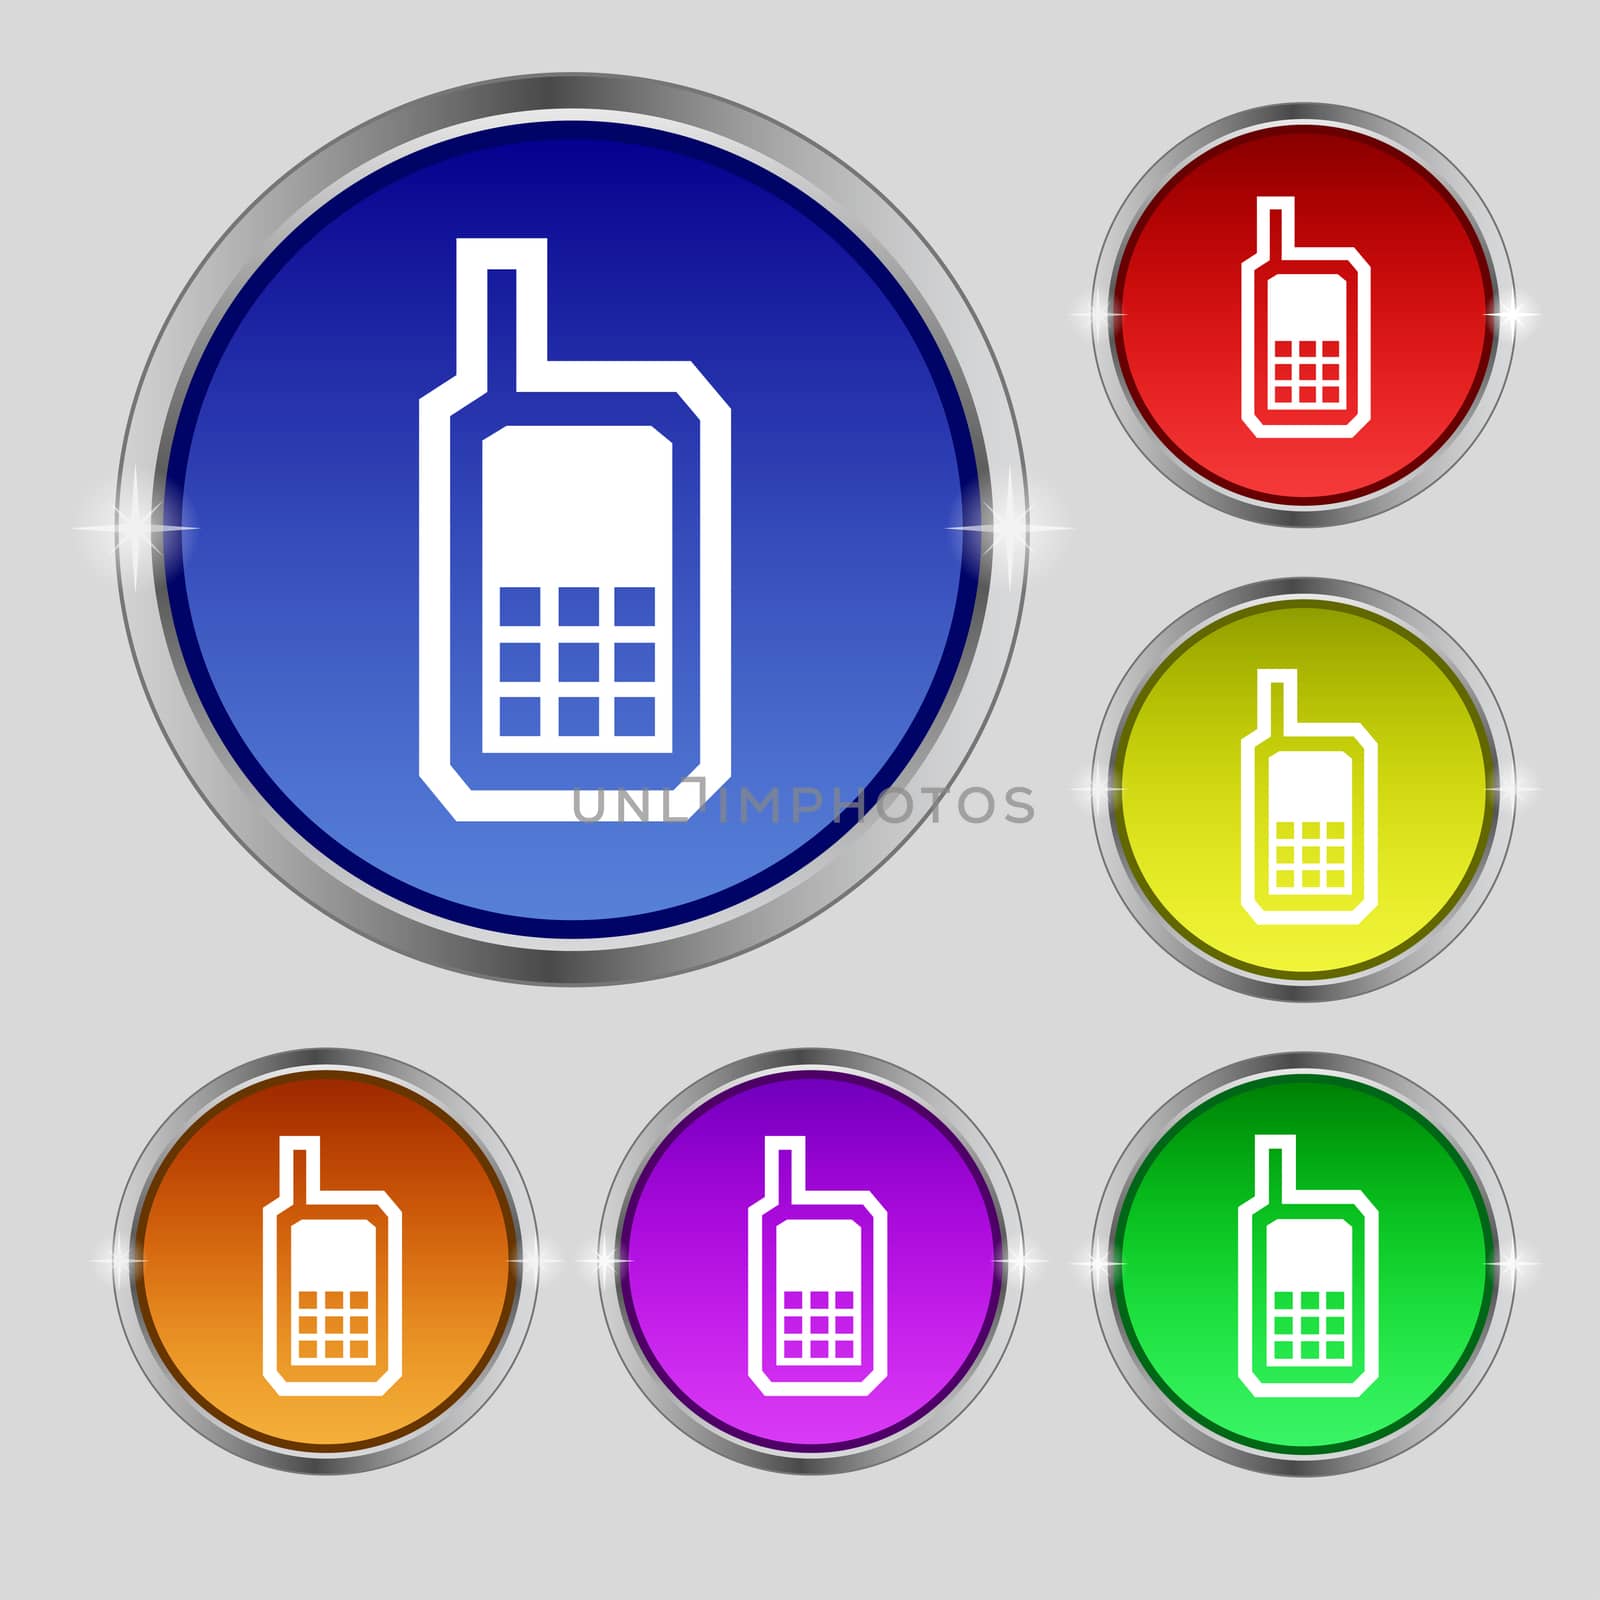 Mobile phone icon sign. Round symbol on bright colourful buttons. illustration